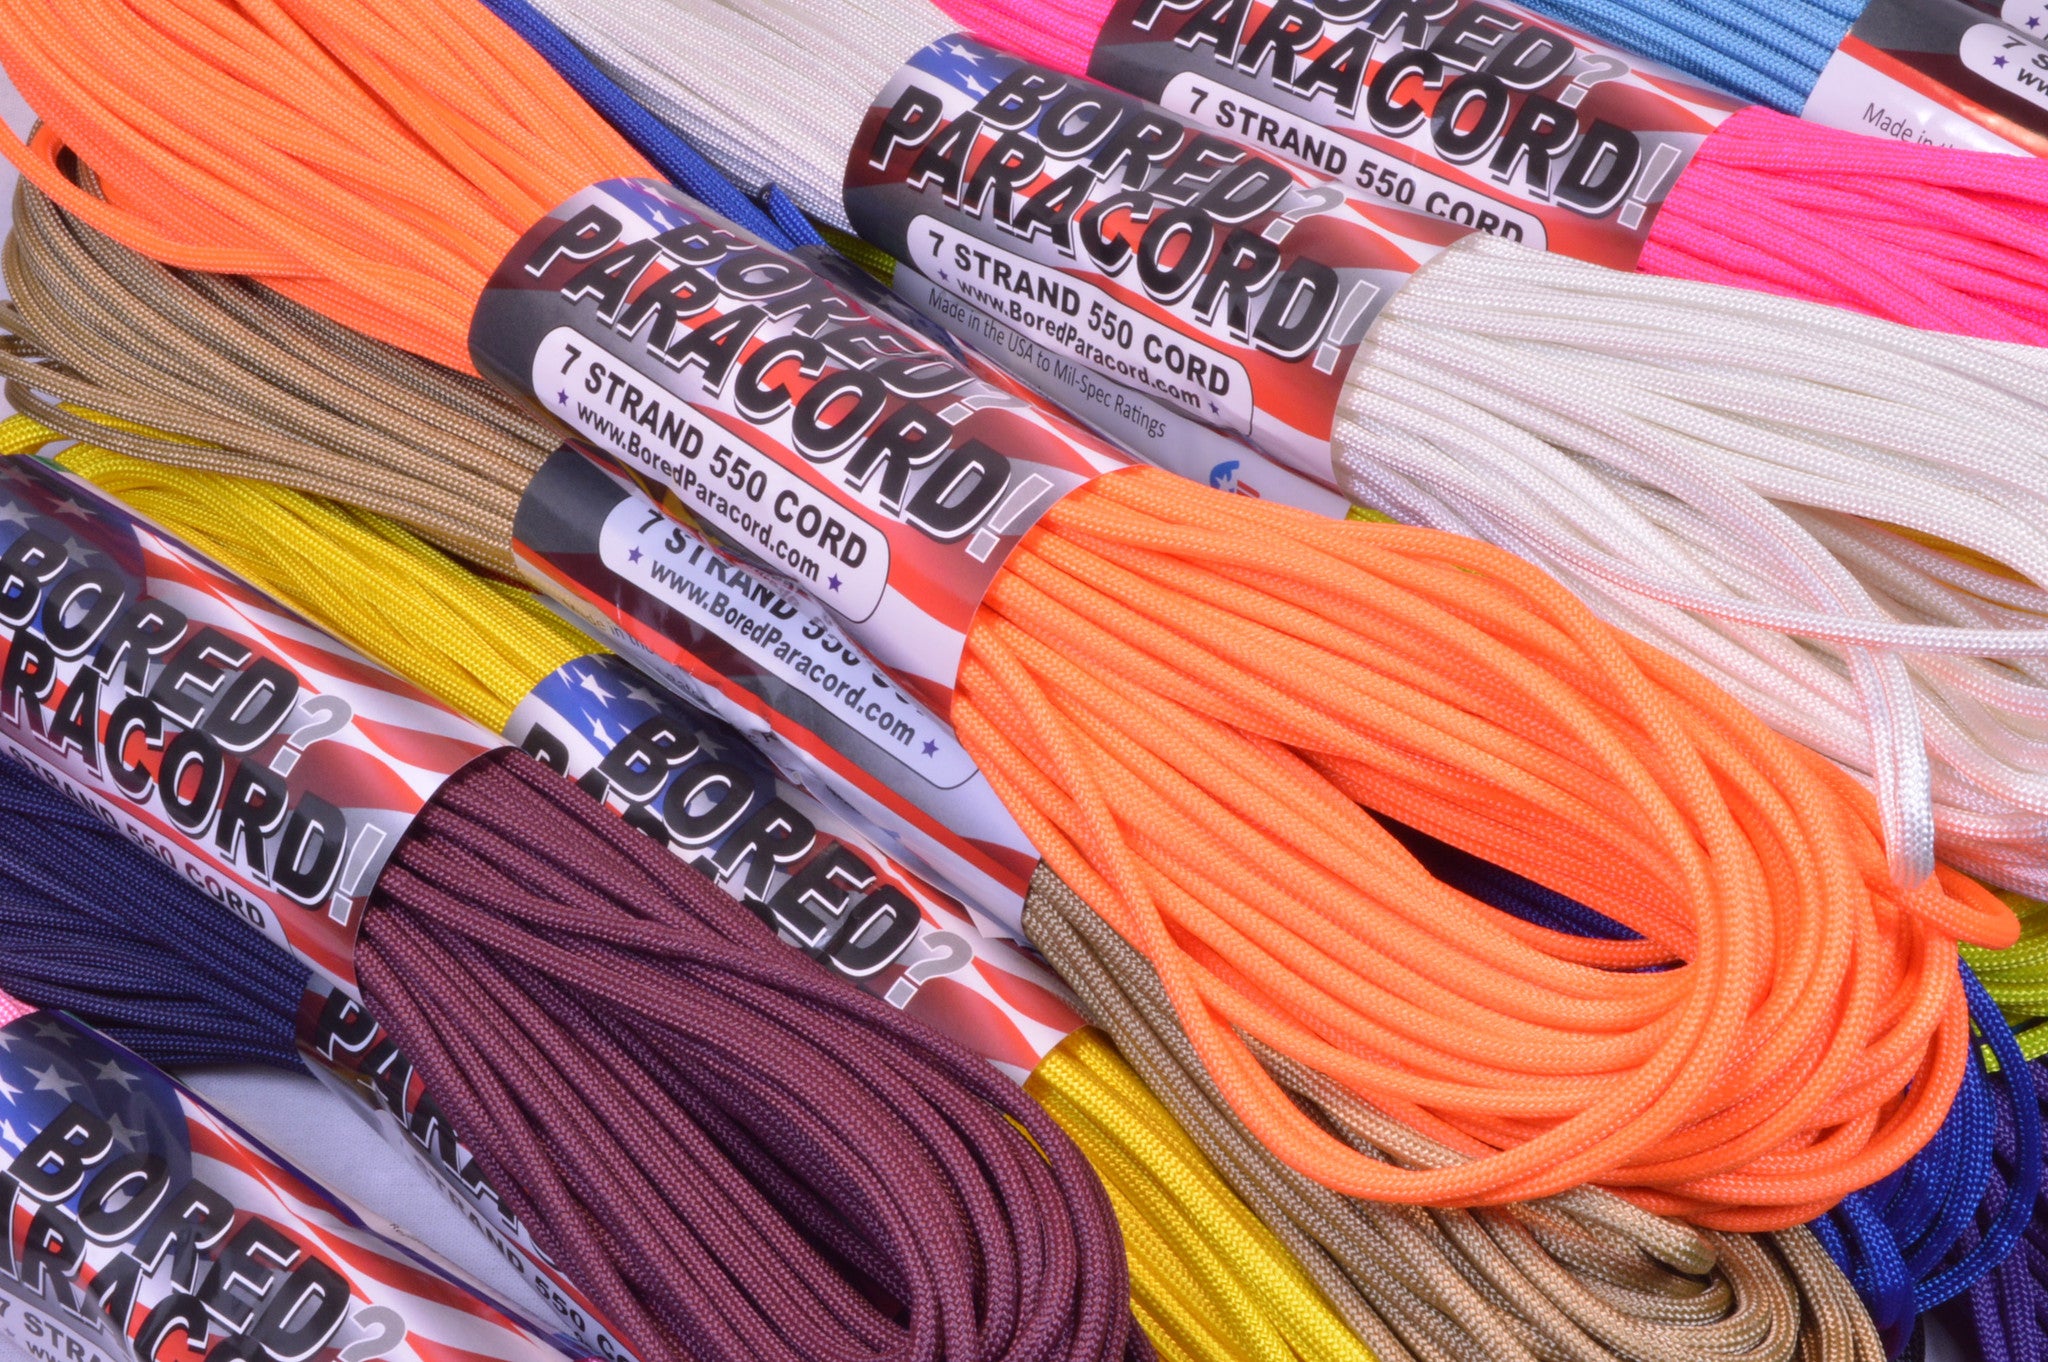  Bored Paracord - 1', 10', 25', 50', 100' Hanks & 250', 1000'  Spools of Parachute 550 Cord Type III 7 Strand Paracord Well Over 300  Colors - Bite - 250 Foot Spool : Sports & Outdoors